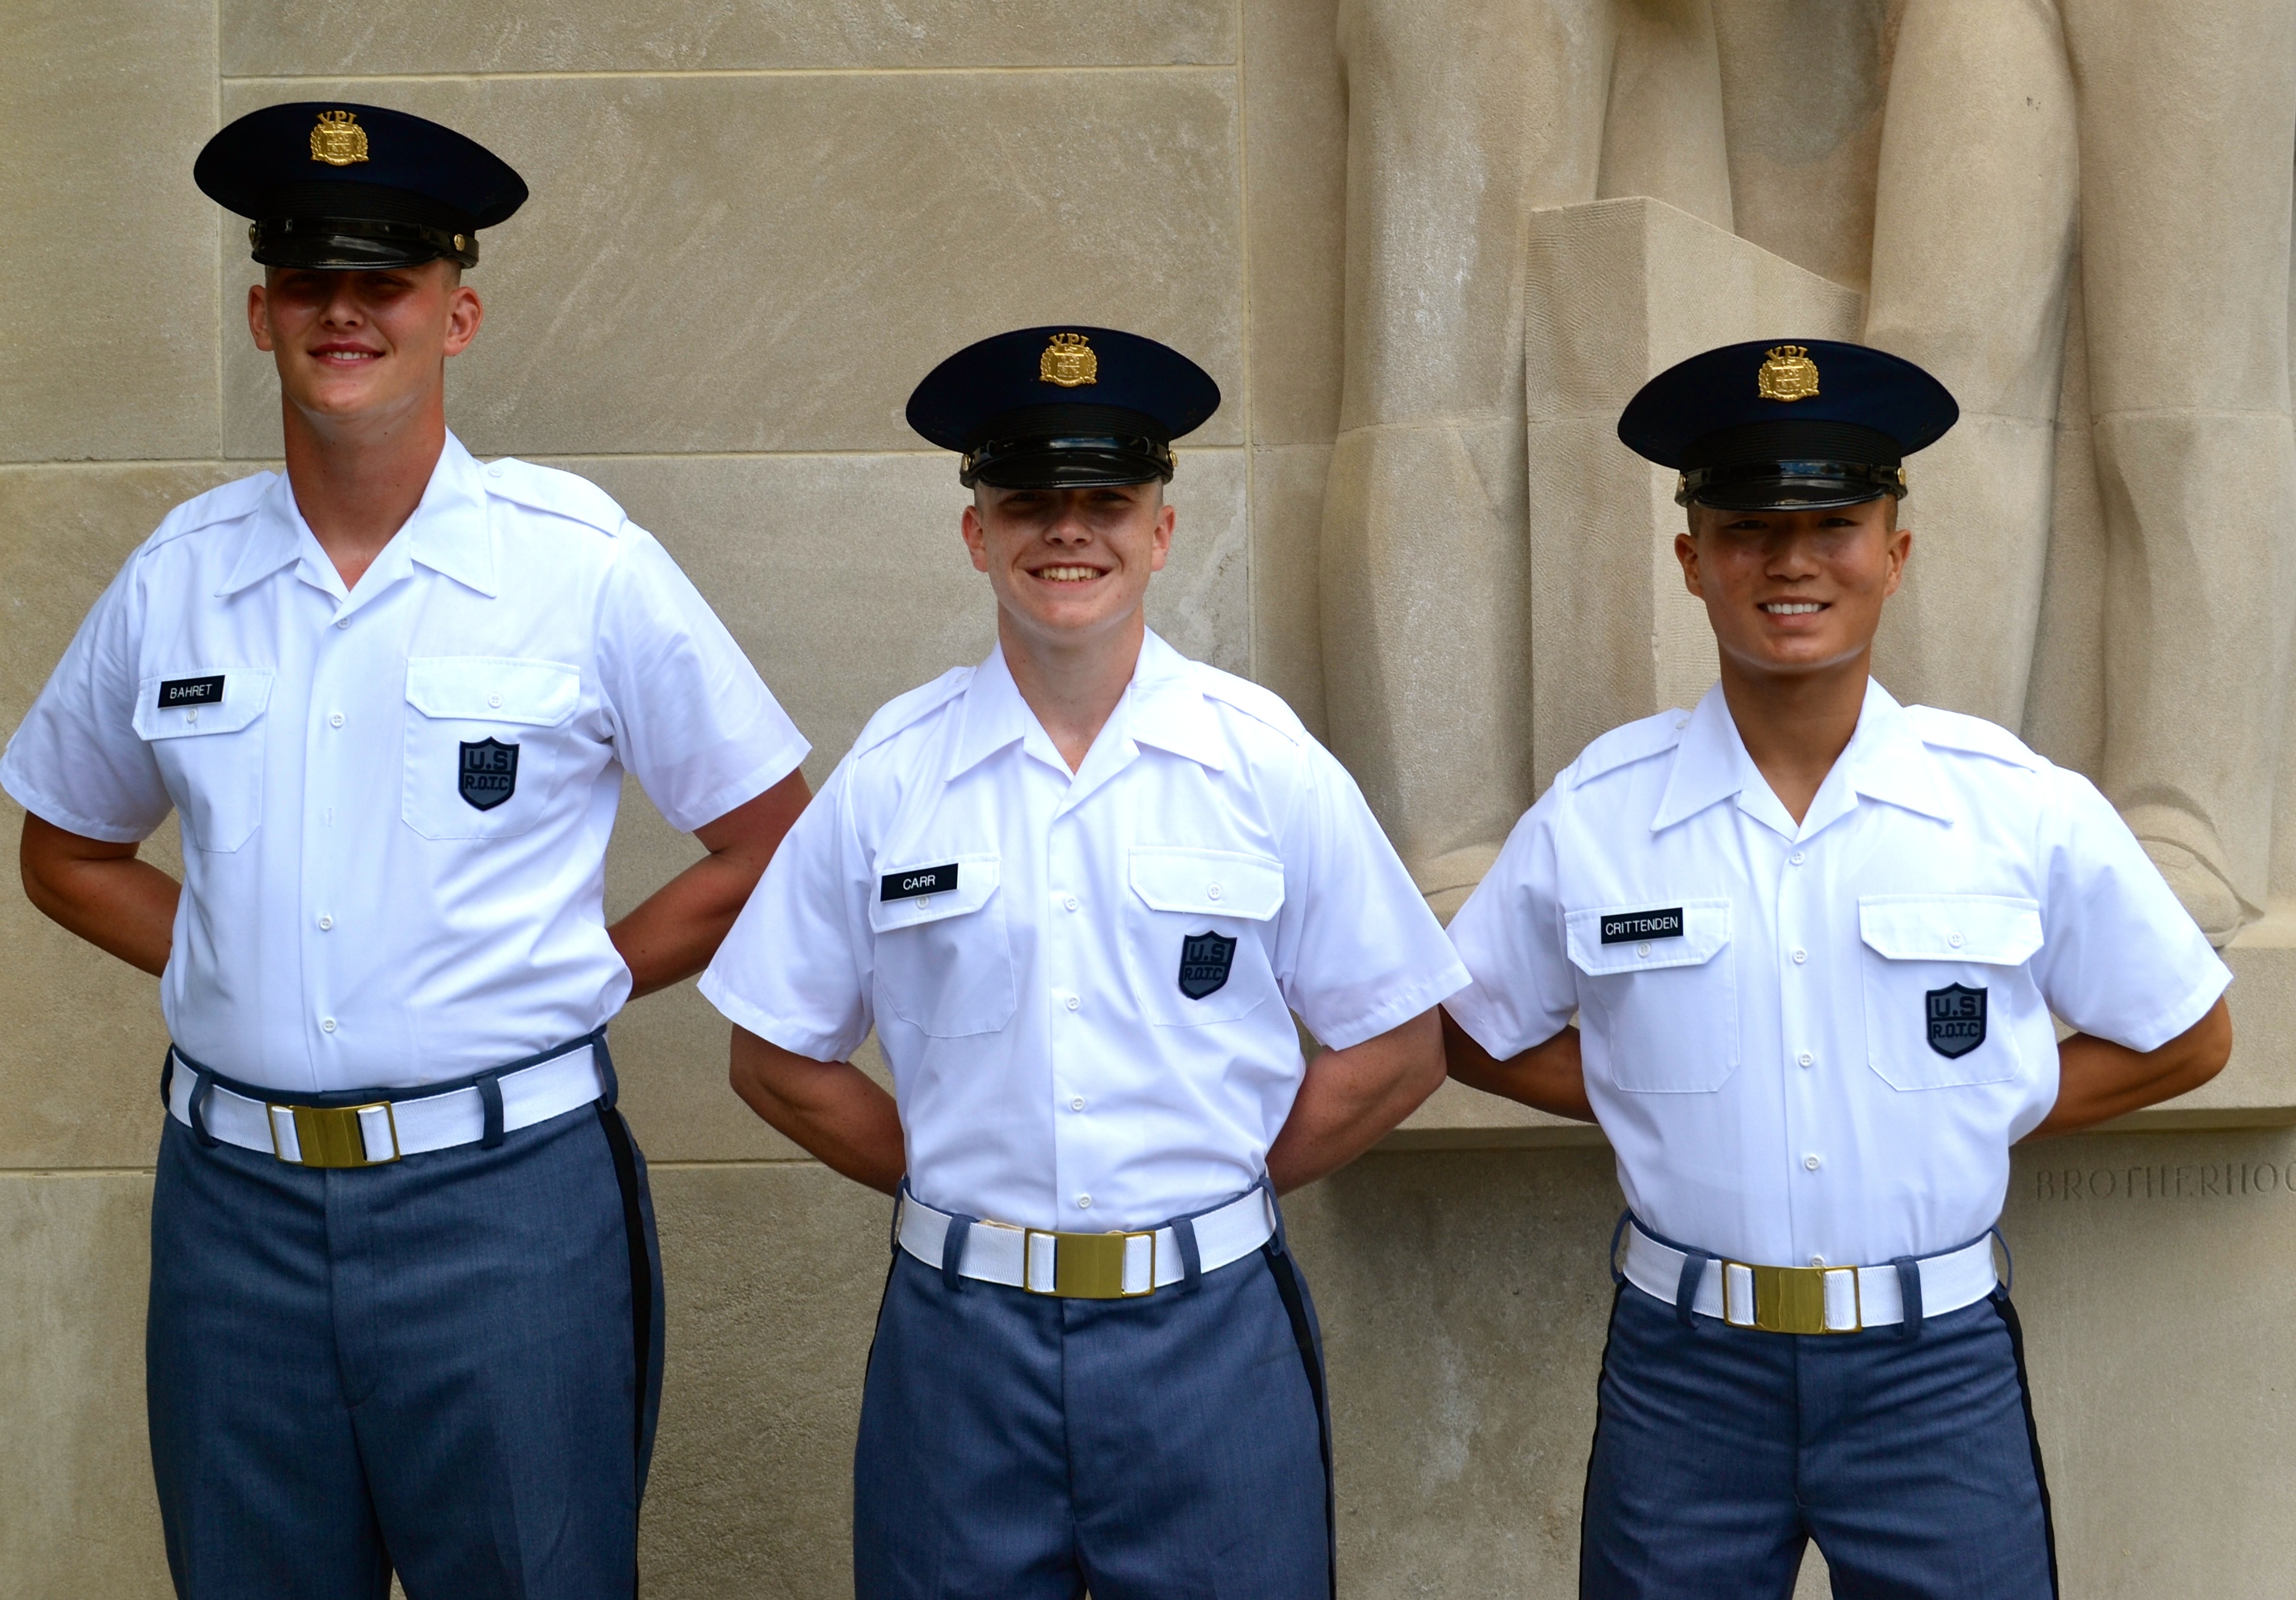 From left to right are Cadets Joseph Bahret, Christian Carr, and Sean Crittenden standing in front of the Pylons.